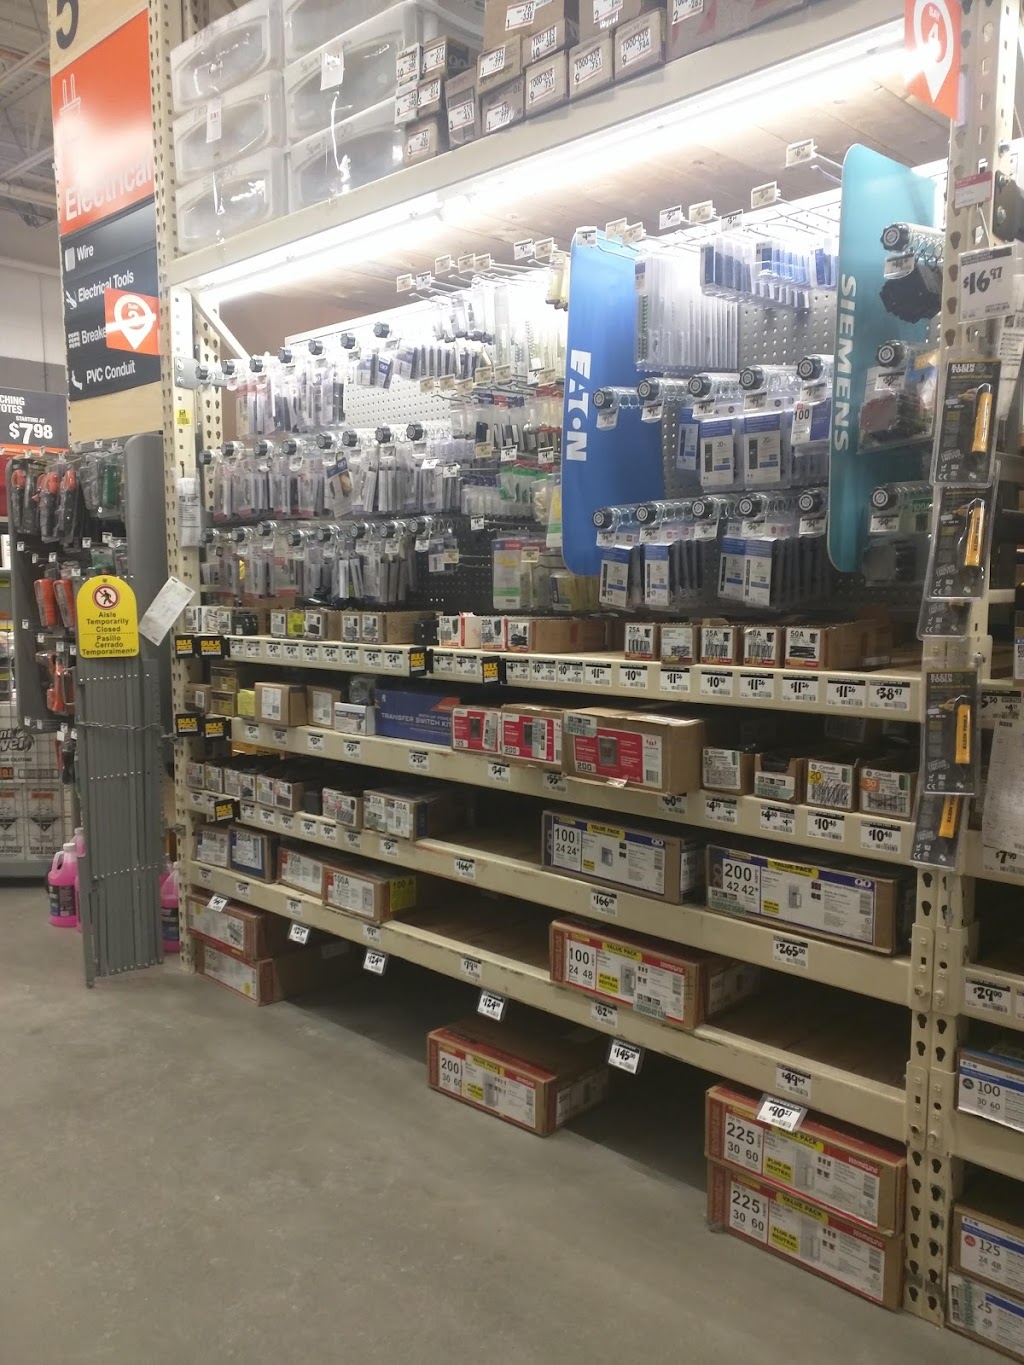 The Home Depot | 3901 Vineyard Dr, Dunkirk, NY 14048, USA | Phone: (716) 672-8200